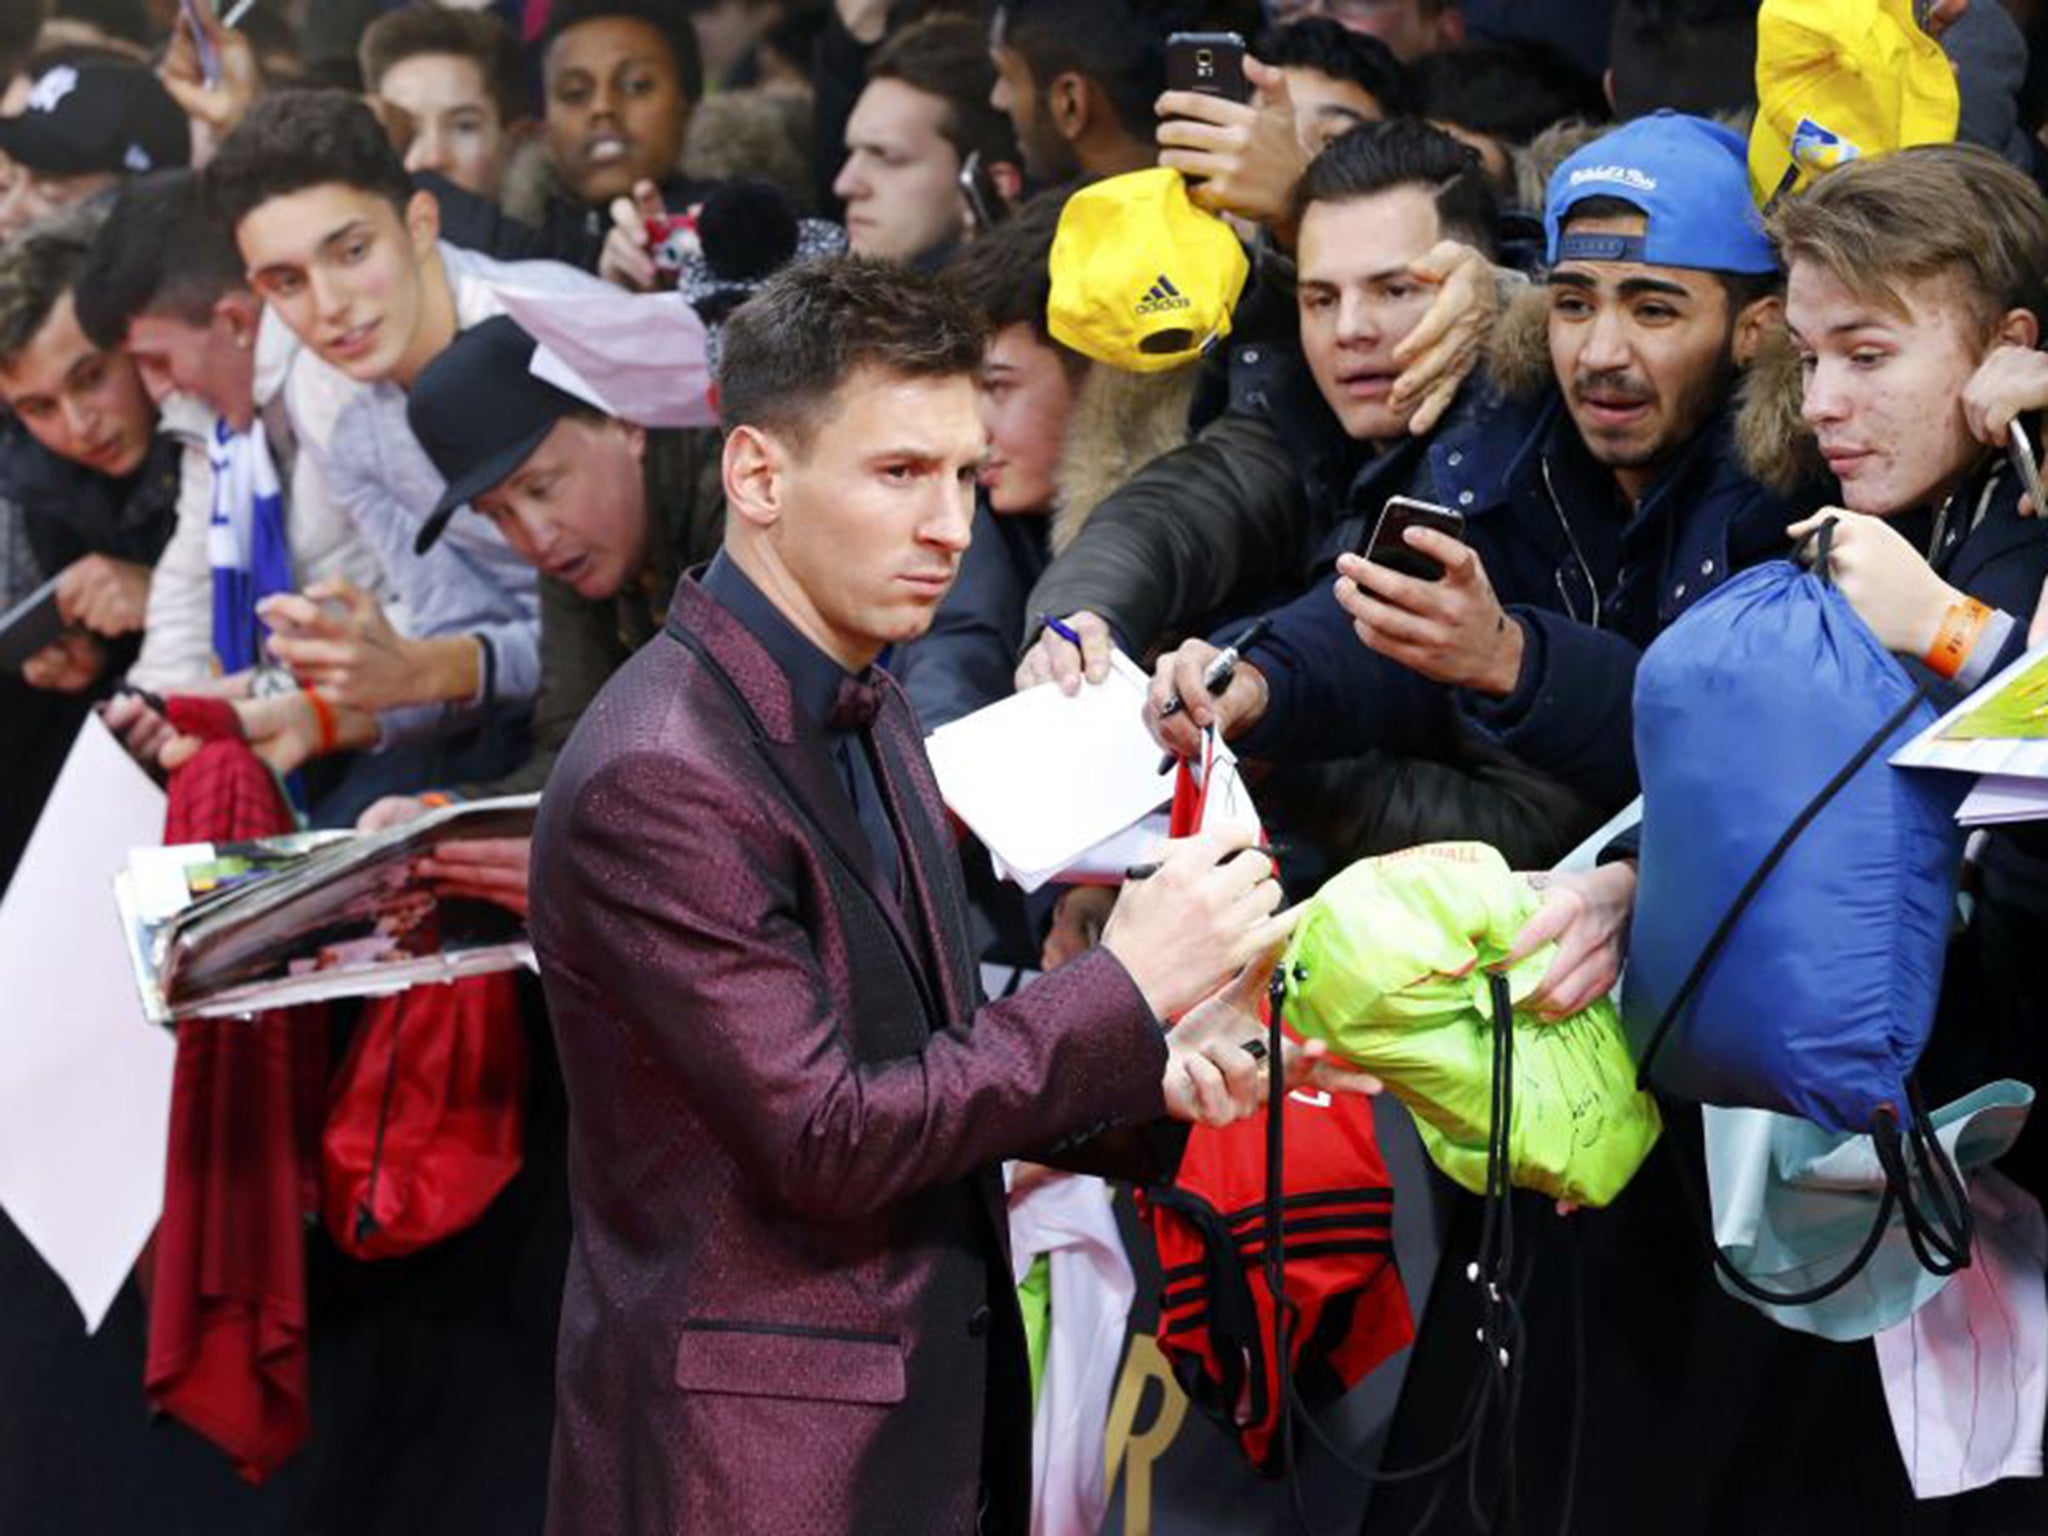 Lionel Messi signs autographs outside the Ballon d’Or ceremony in Zurich on Monday (Reuters)